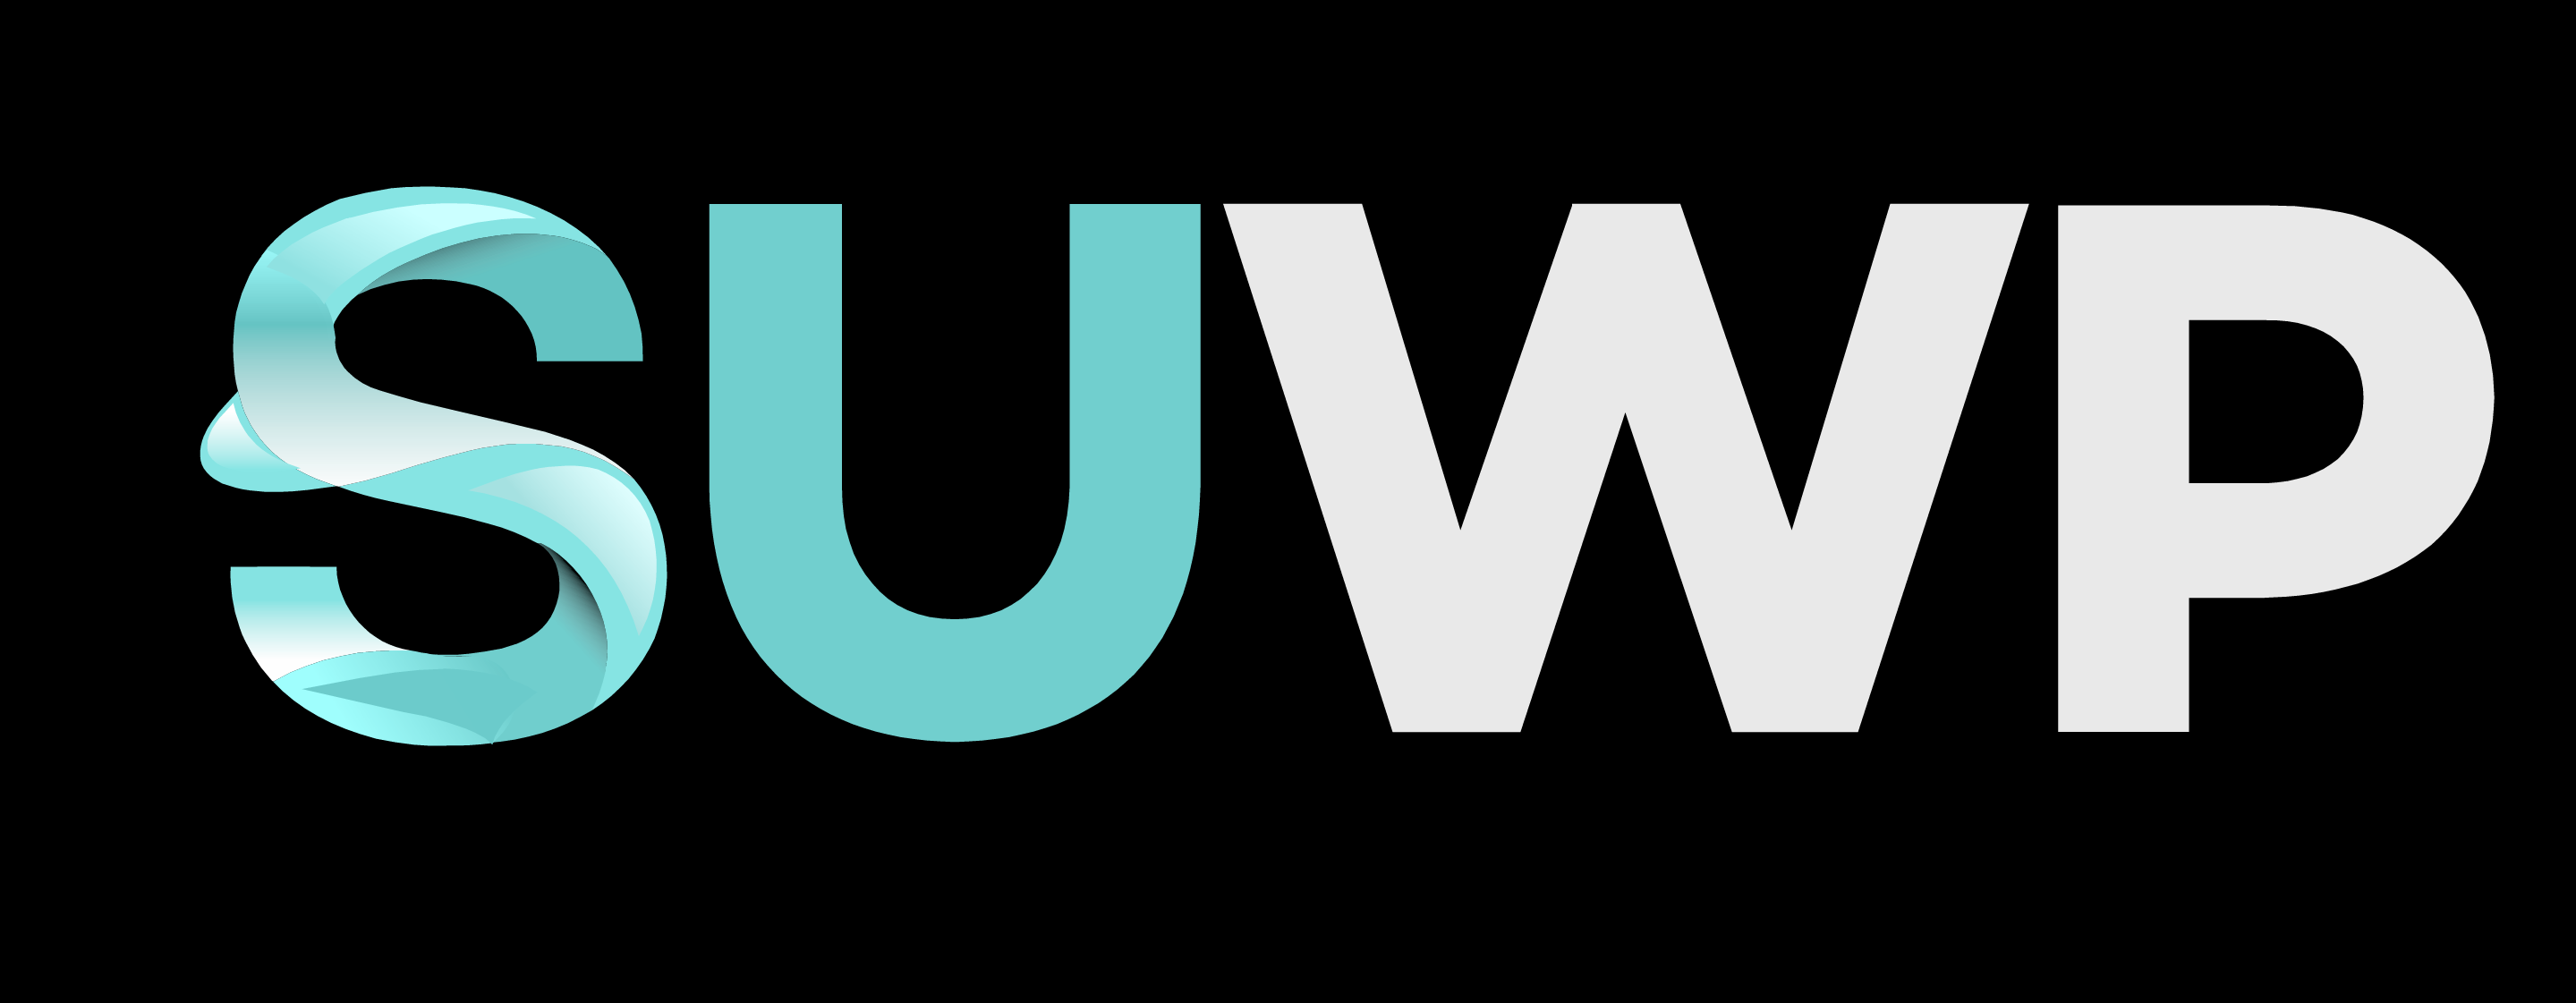 suwp-logo-with-background.png